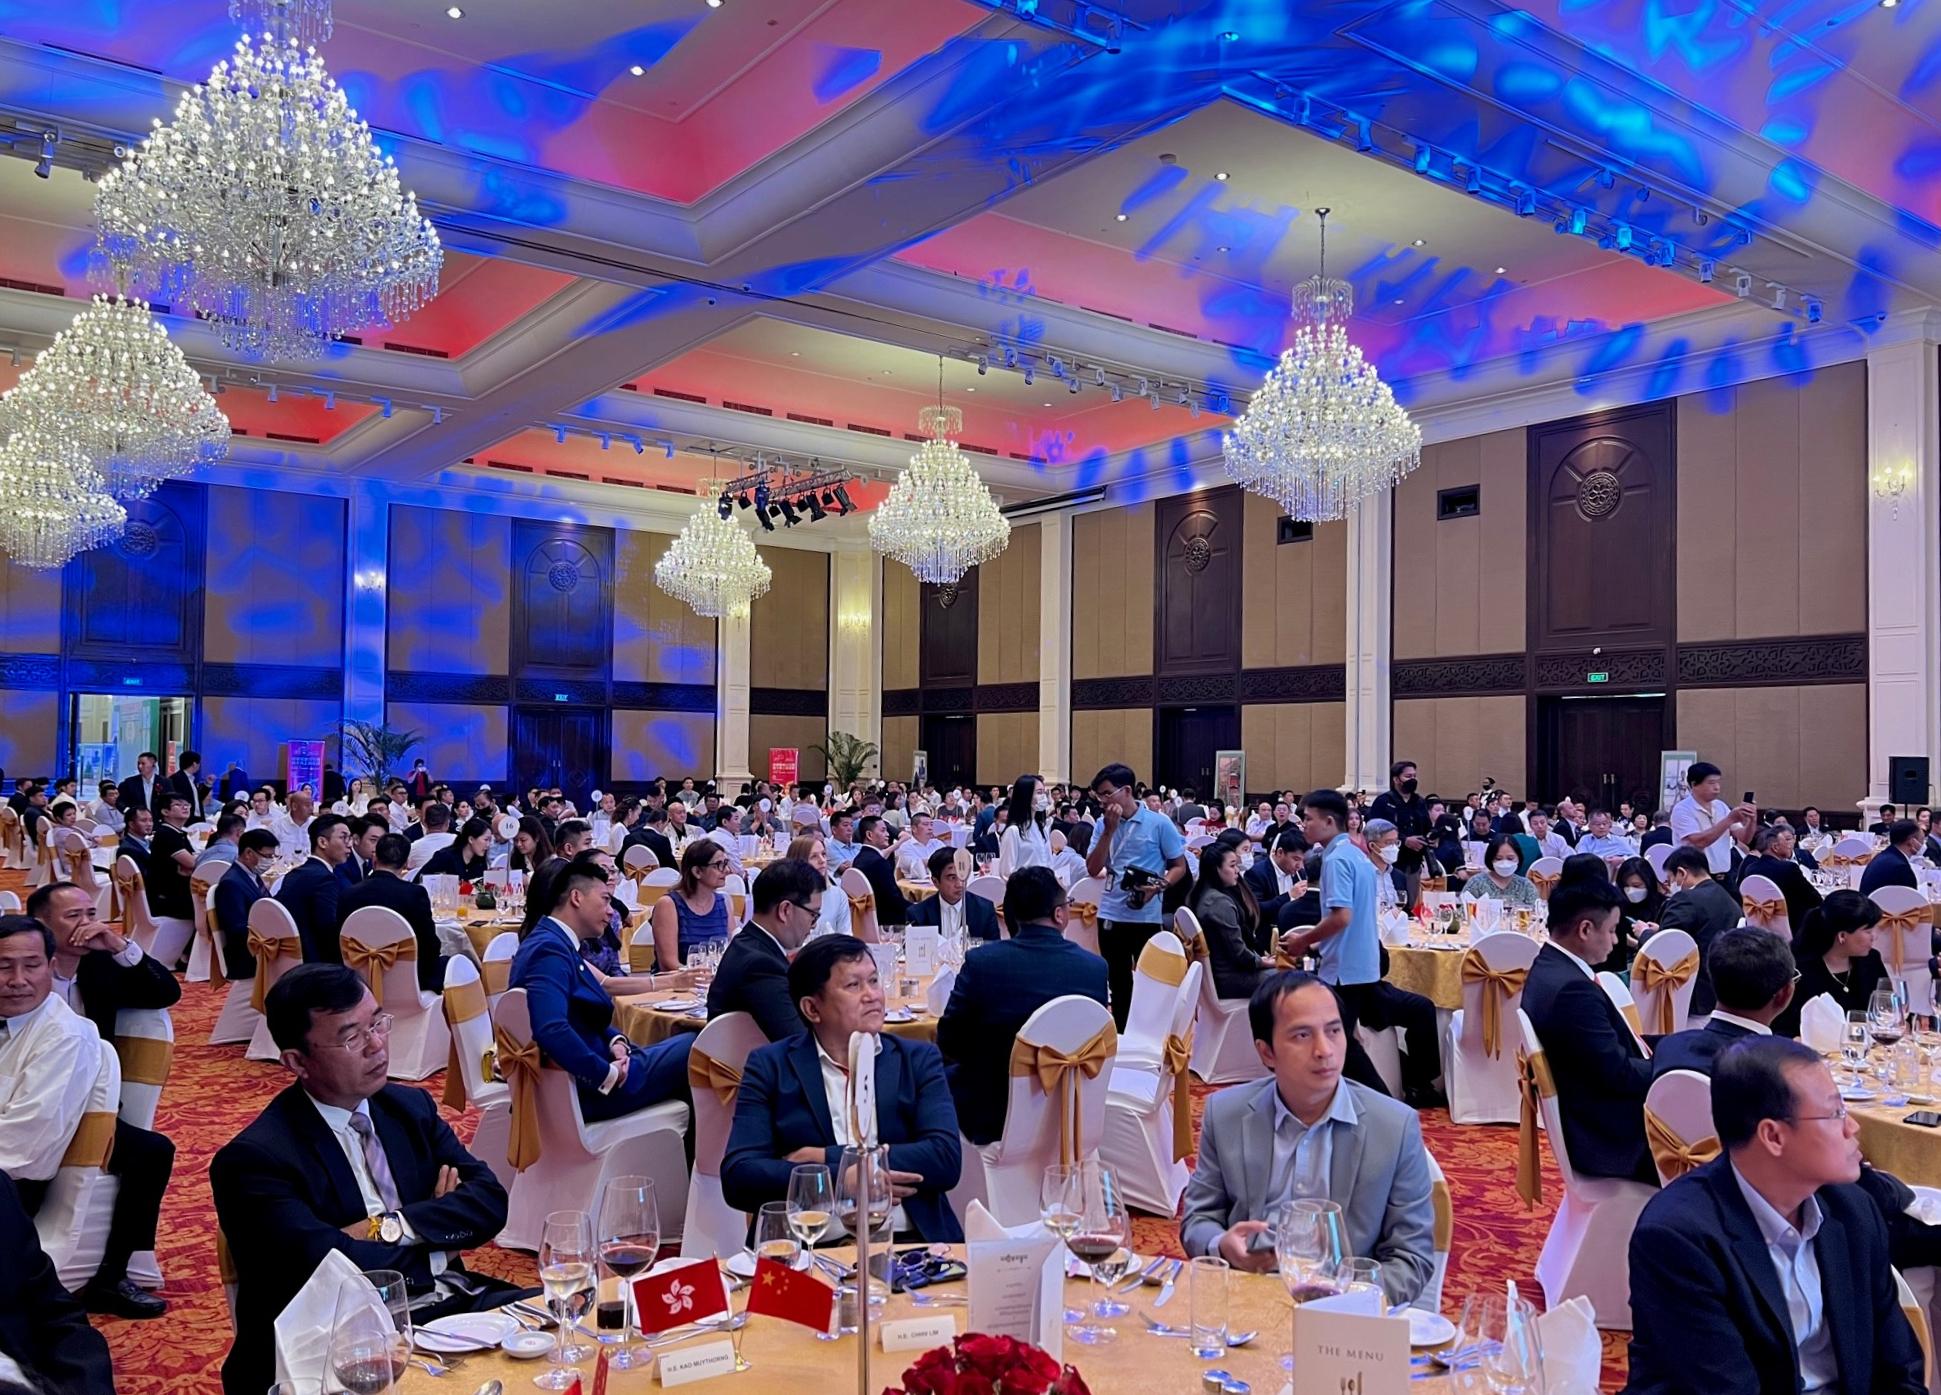 The Secretary for Commerce and Economic Development, Mr Algernon Yau, attended a luncheon to celebrate the 25th anniversary of the establishment of the Hong Kong Special Administrative Region in Phnom Penh, Cambodia, today (September 18). The luncheon attracted more than 400 participants from the local business and political sectors.